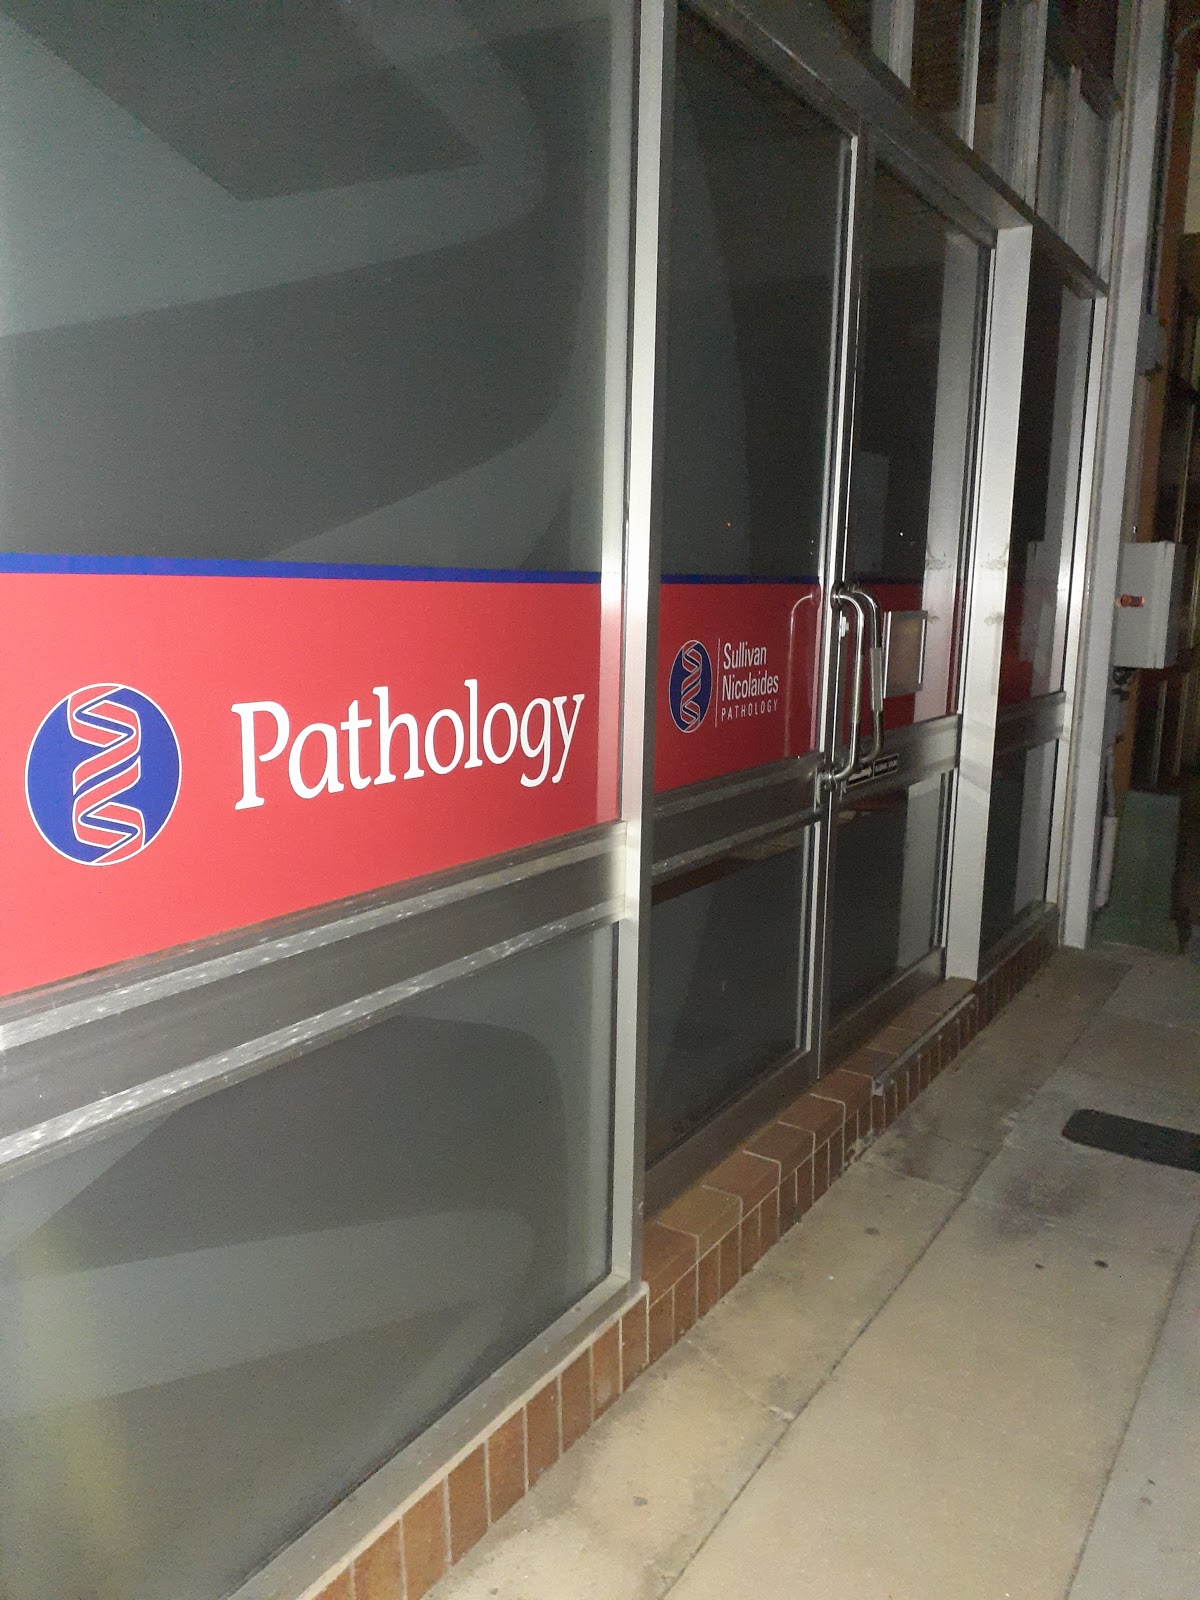 Photo of Sullivan Nicolaides Pathology Redcliffe COVID Testing at 3 Violet St, Redcliffe QLD 4020, Australia